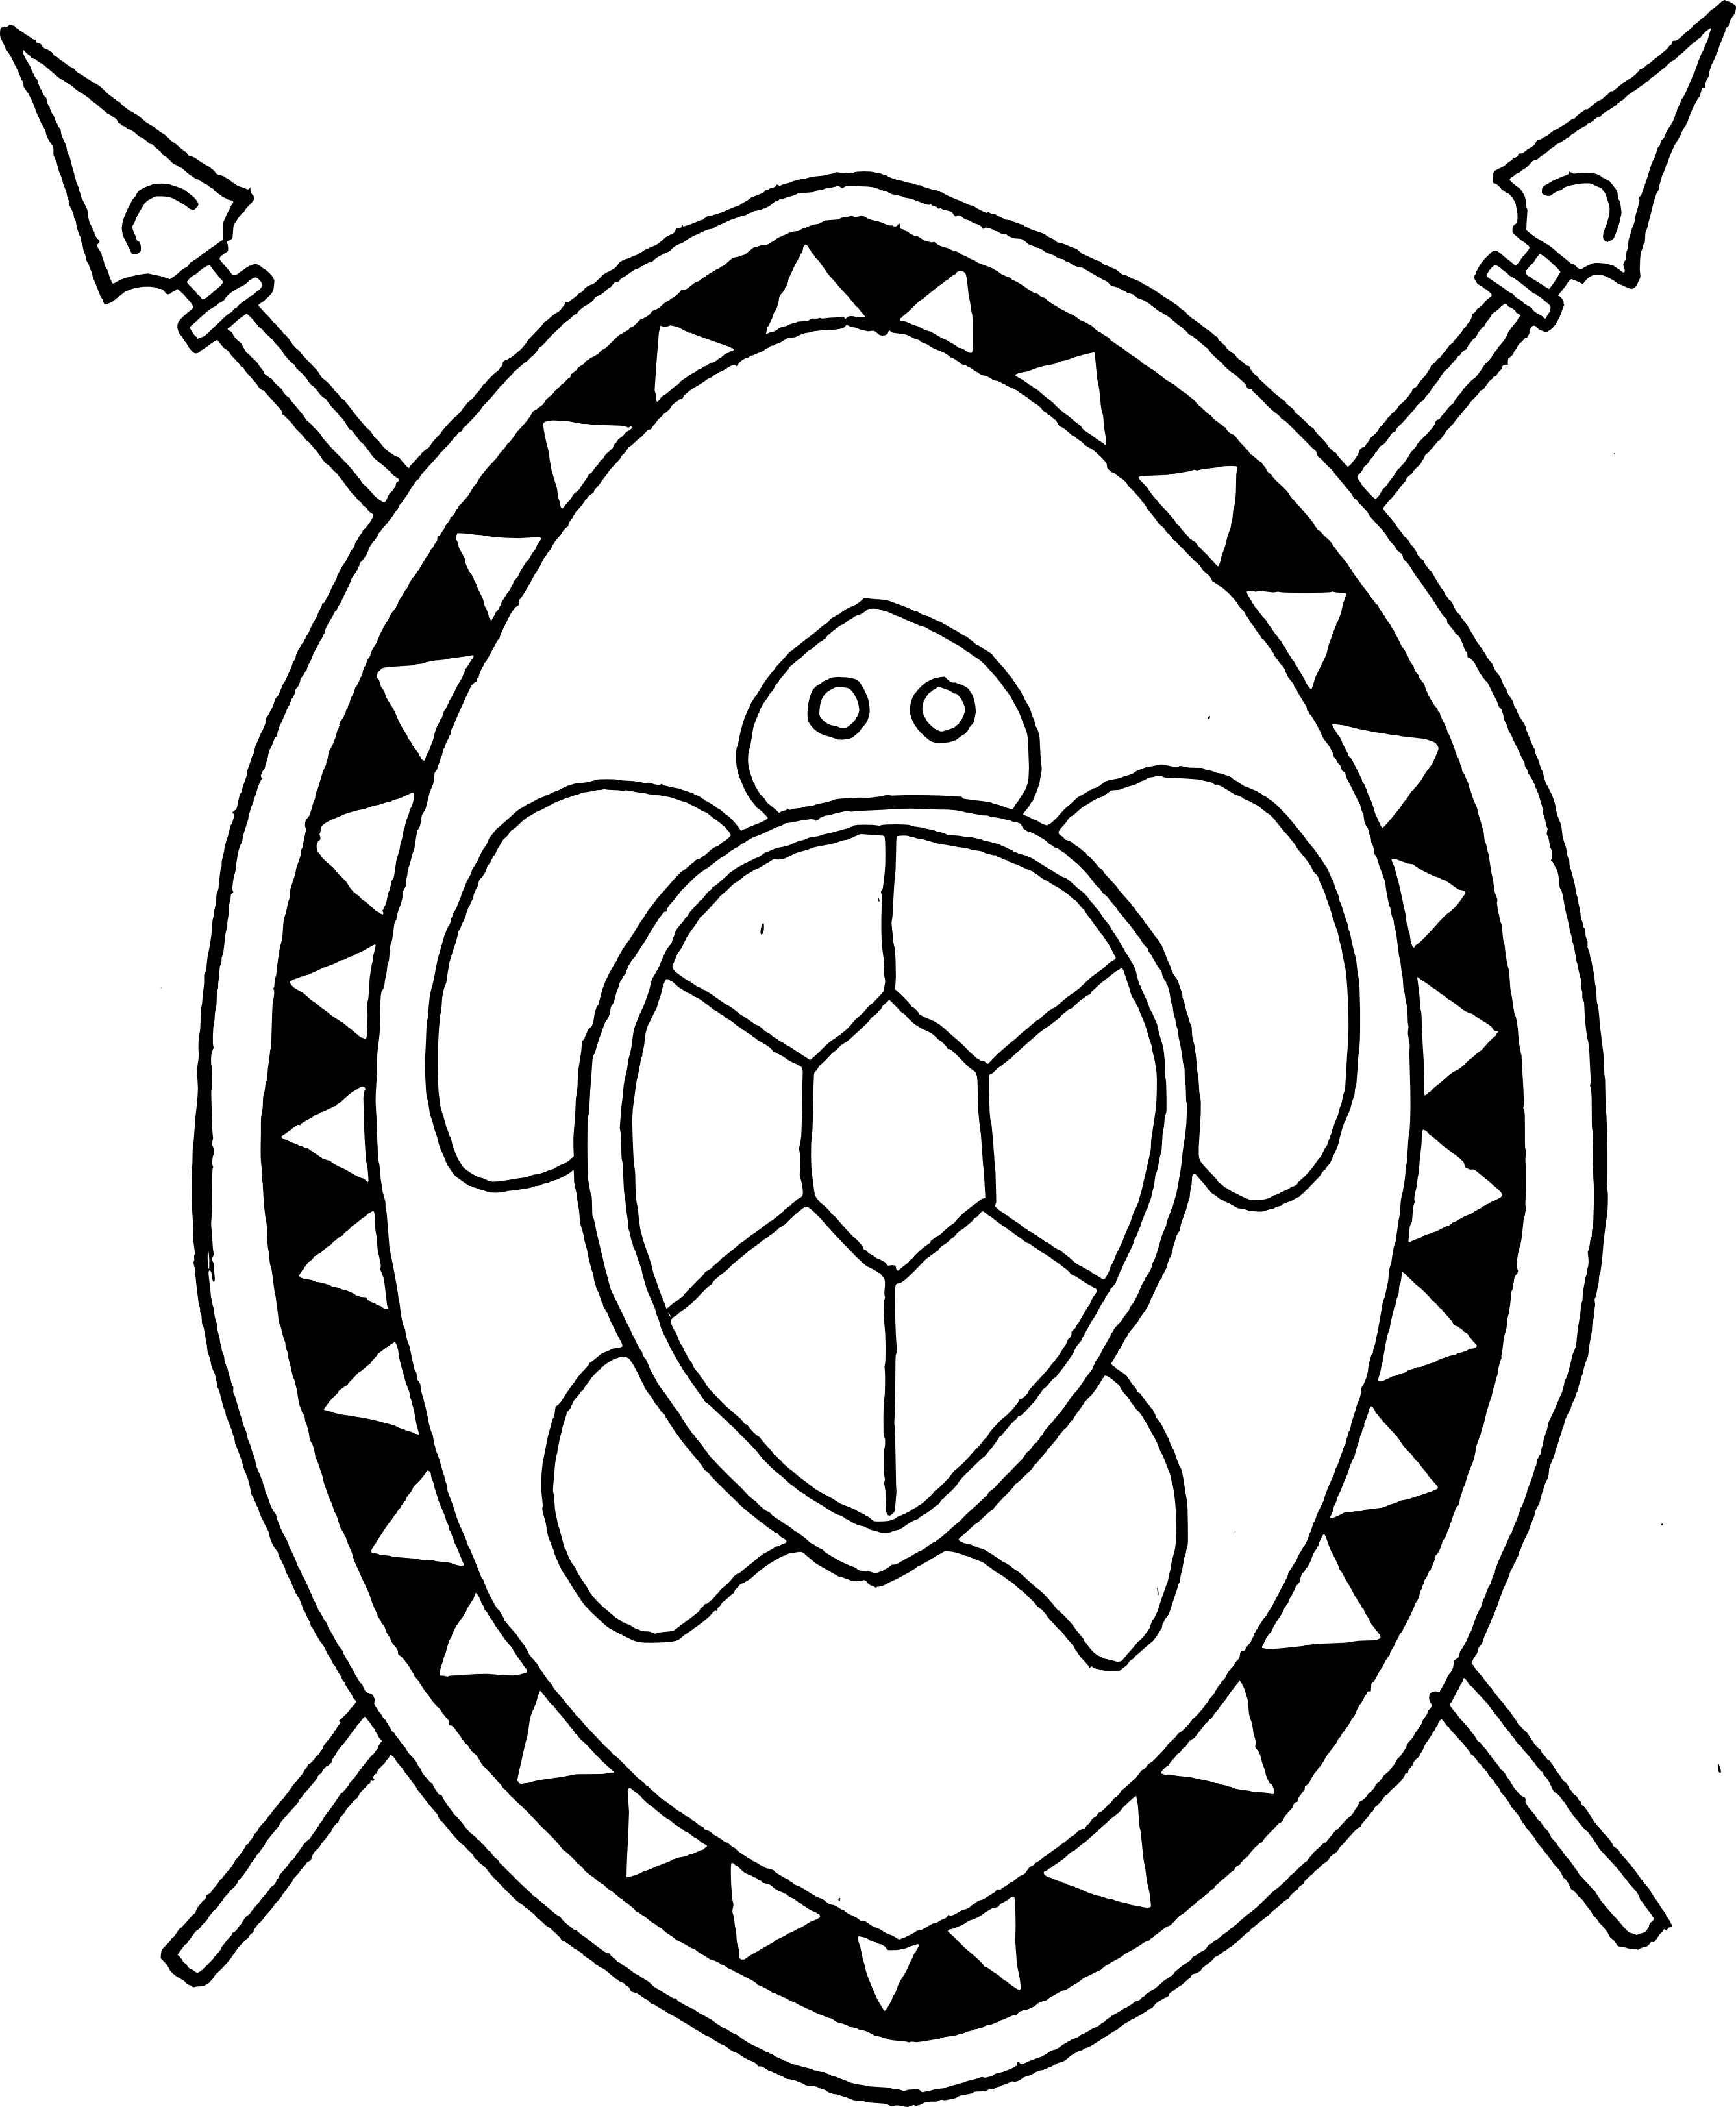 Shield coloring page